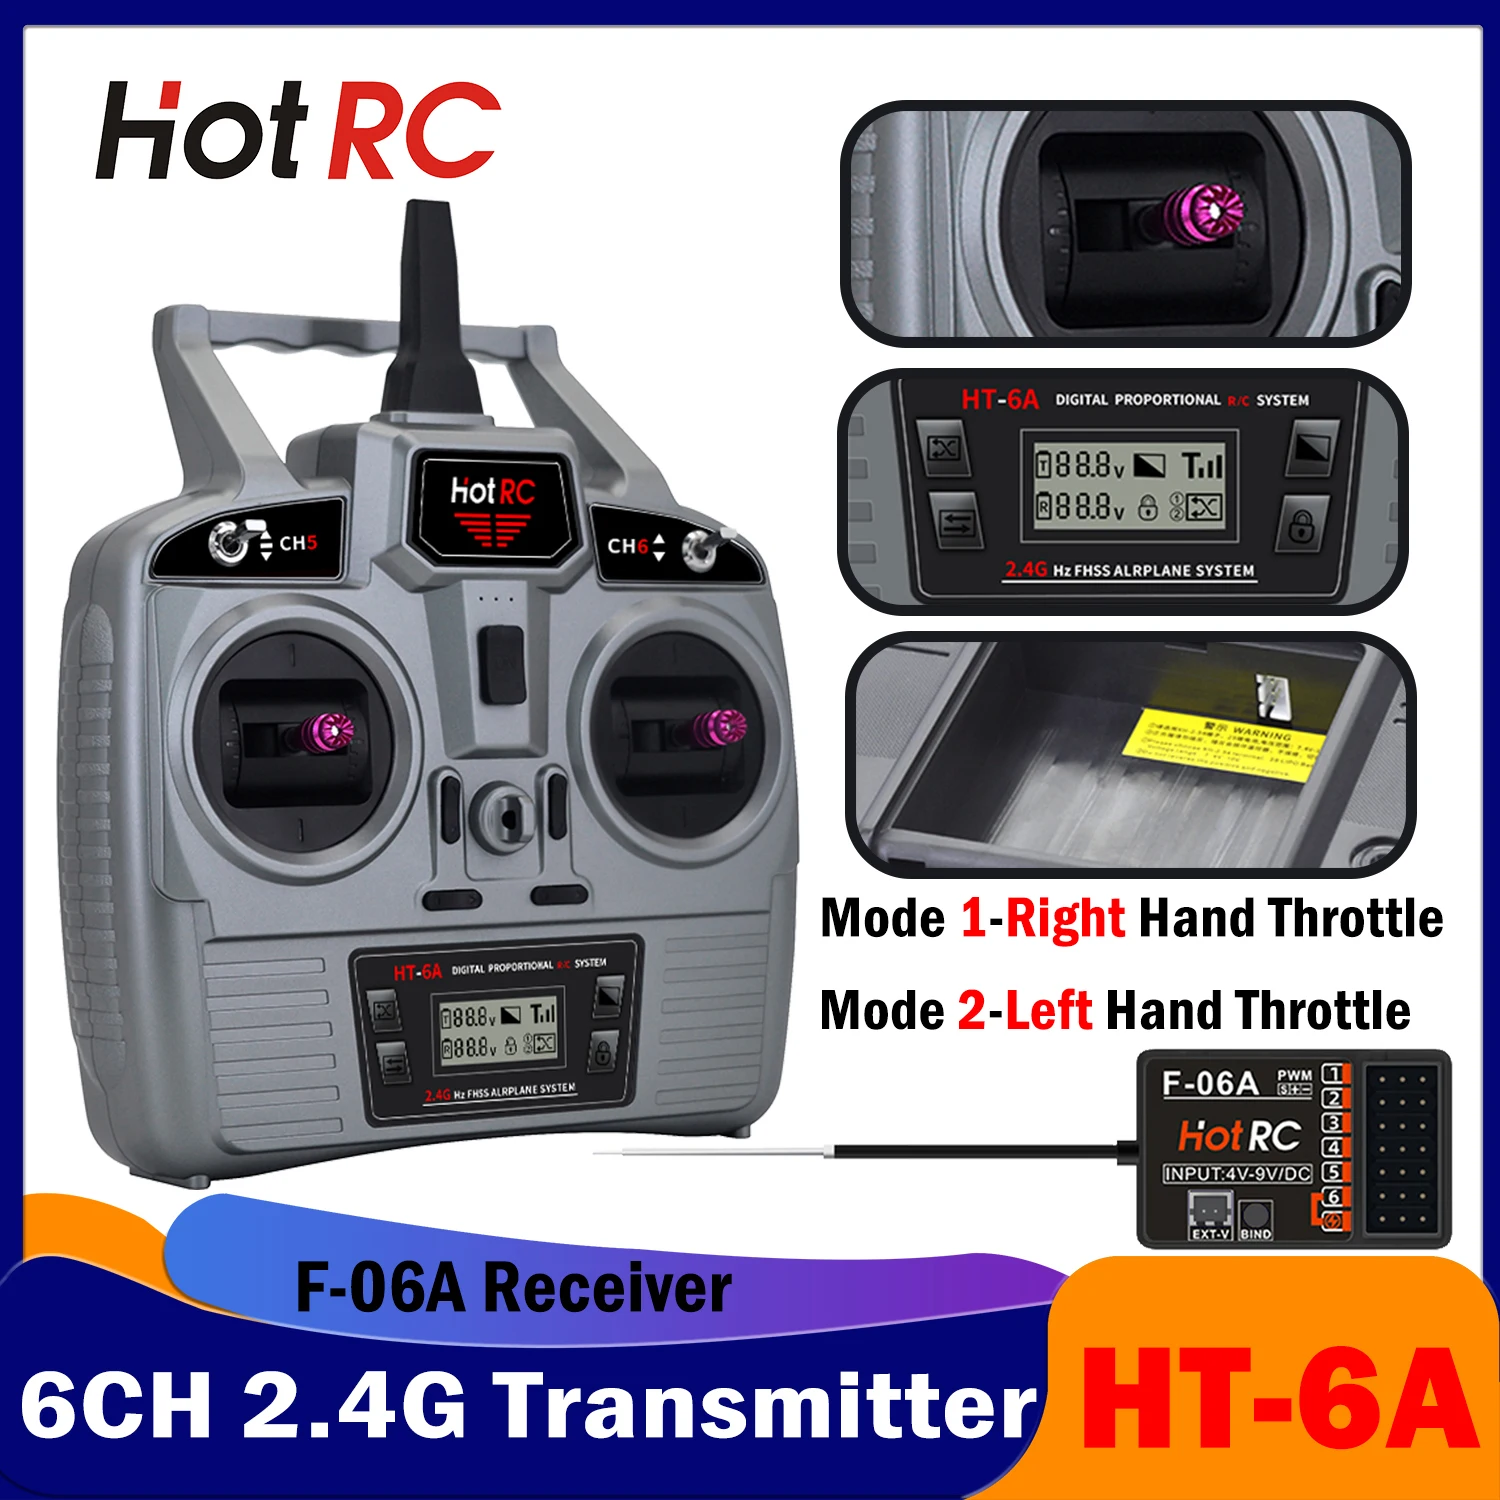 

HotRC 6CH 2.4G HT-6A RC Aircraft Transmitter with F-06A 6 Channel Receiver Radio System for Remote Control Model Vehicles Ship